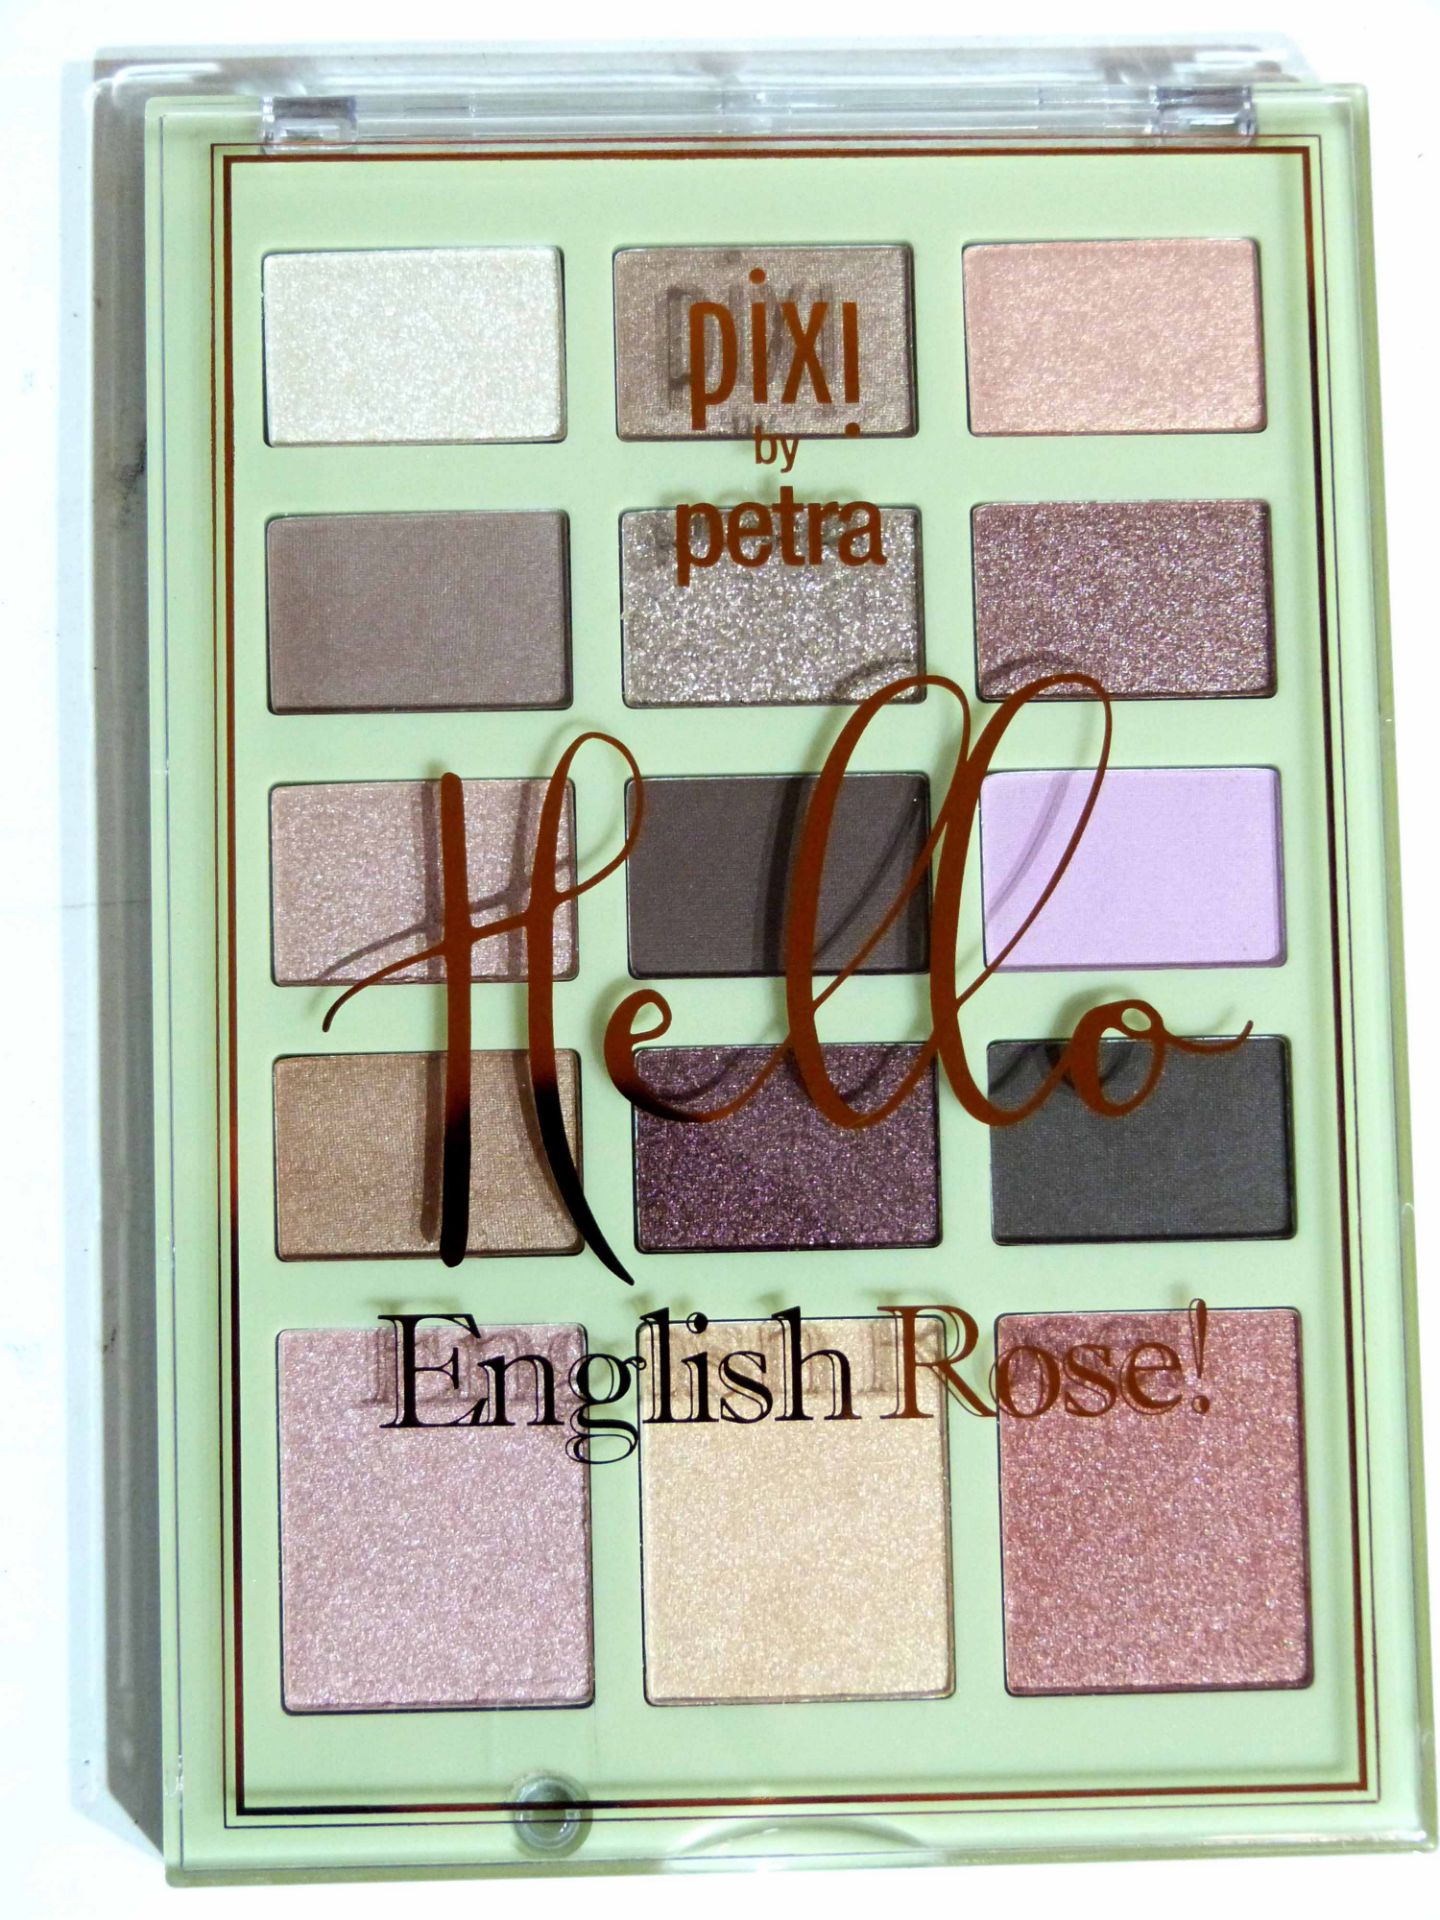 Pixi Beauty Hello Beautiful Face Case – Hello English Rose 15 colour palette. (10 in lot) - Image 3 of 6